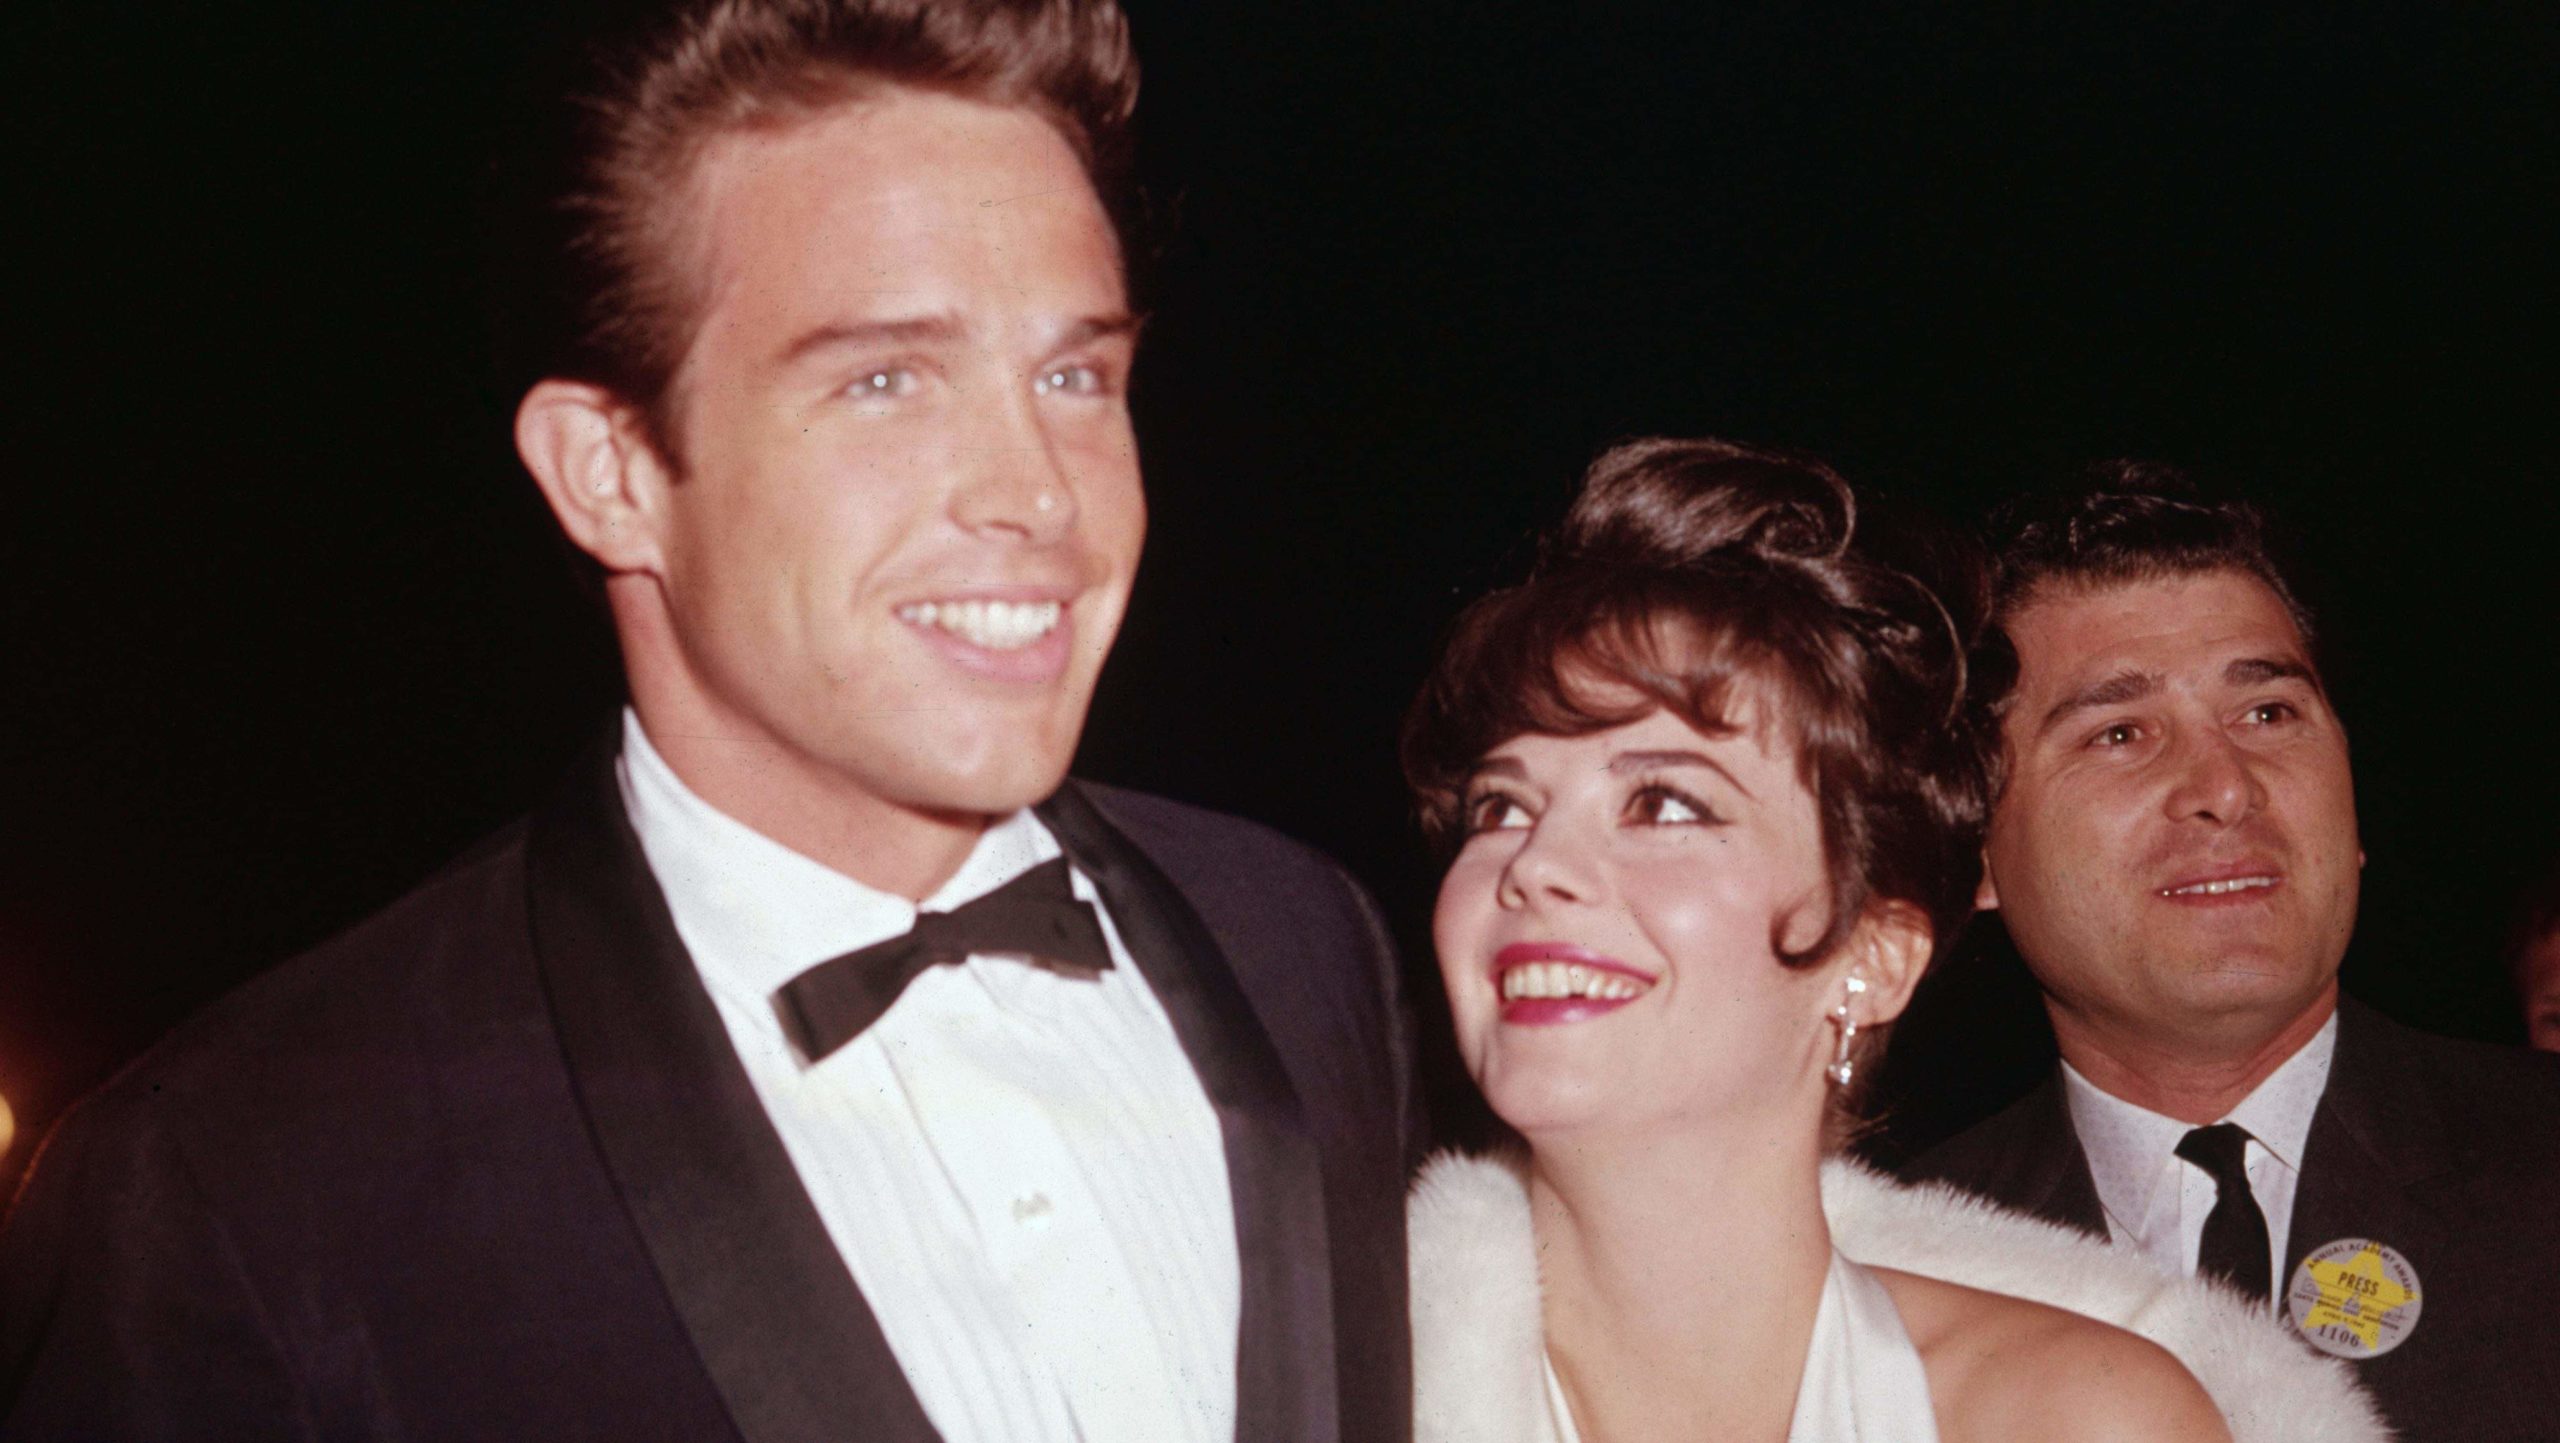 Warren Beatty And Natalie Wood Affair Allegedly Caused Her Divorce Insights On Actor’s Rich Dating History!